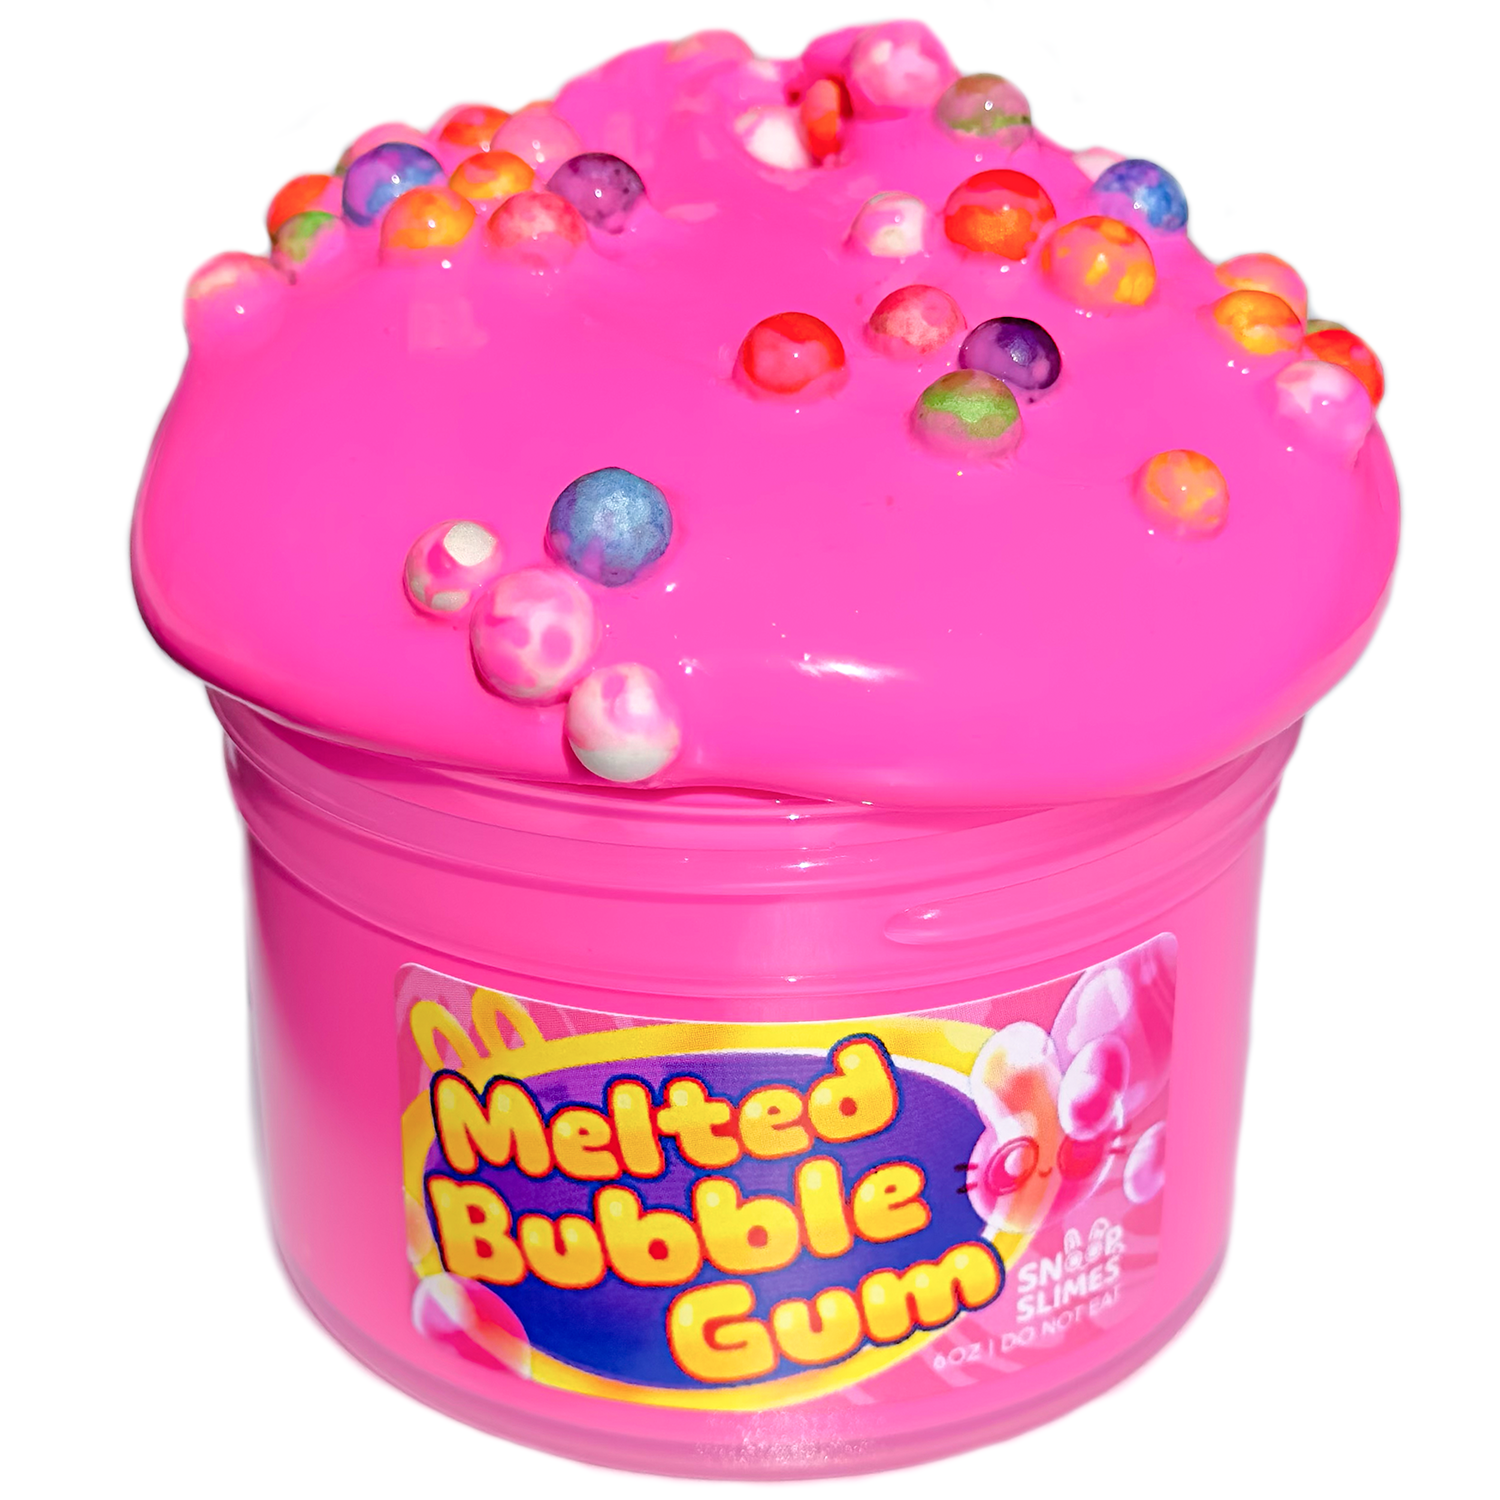 Melted Bubble Gum Slime